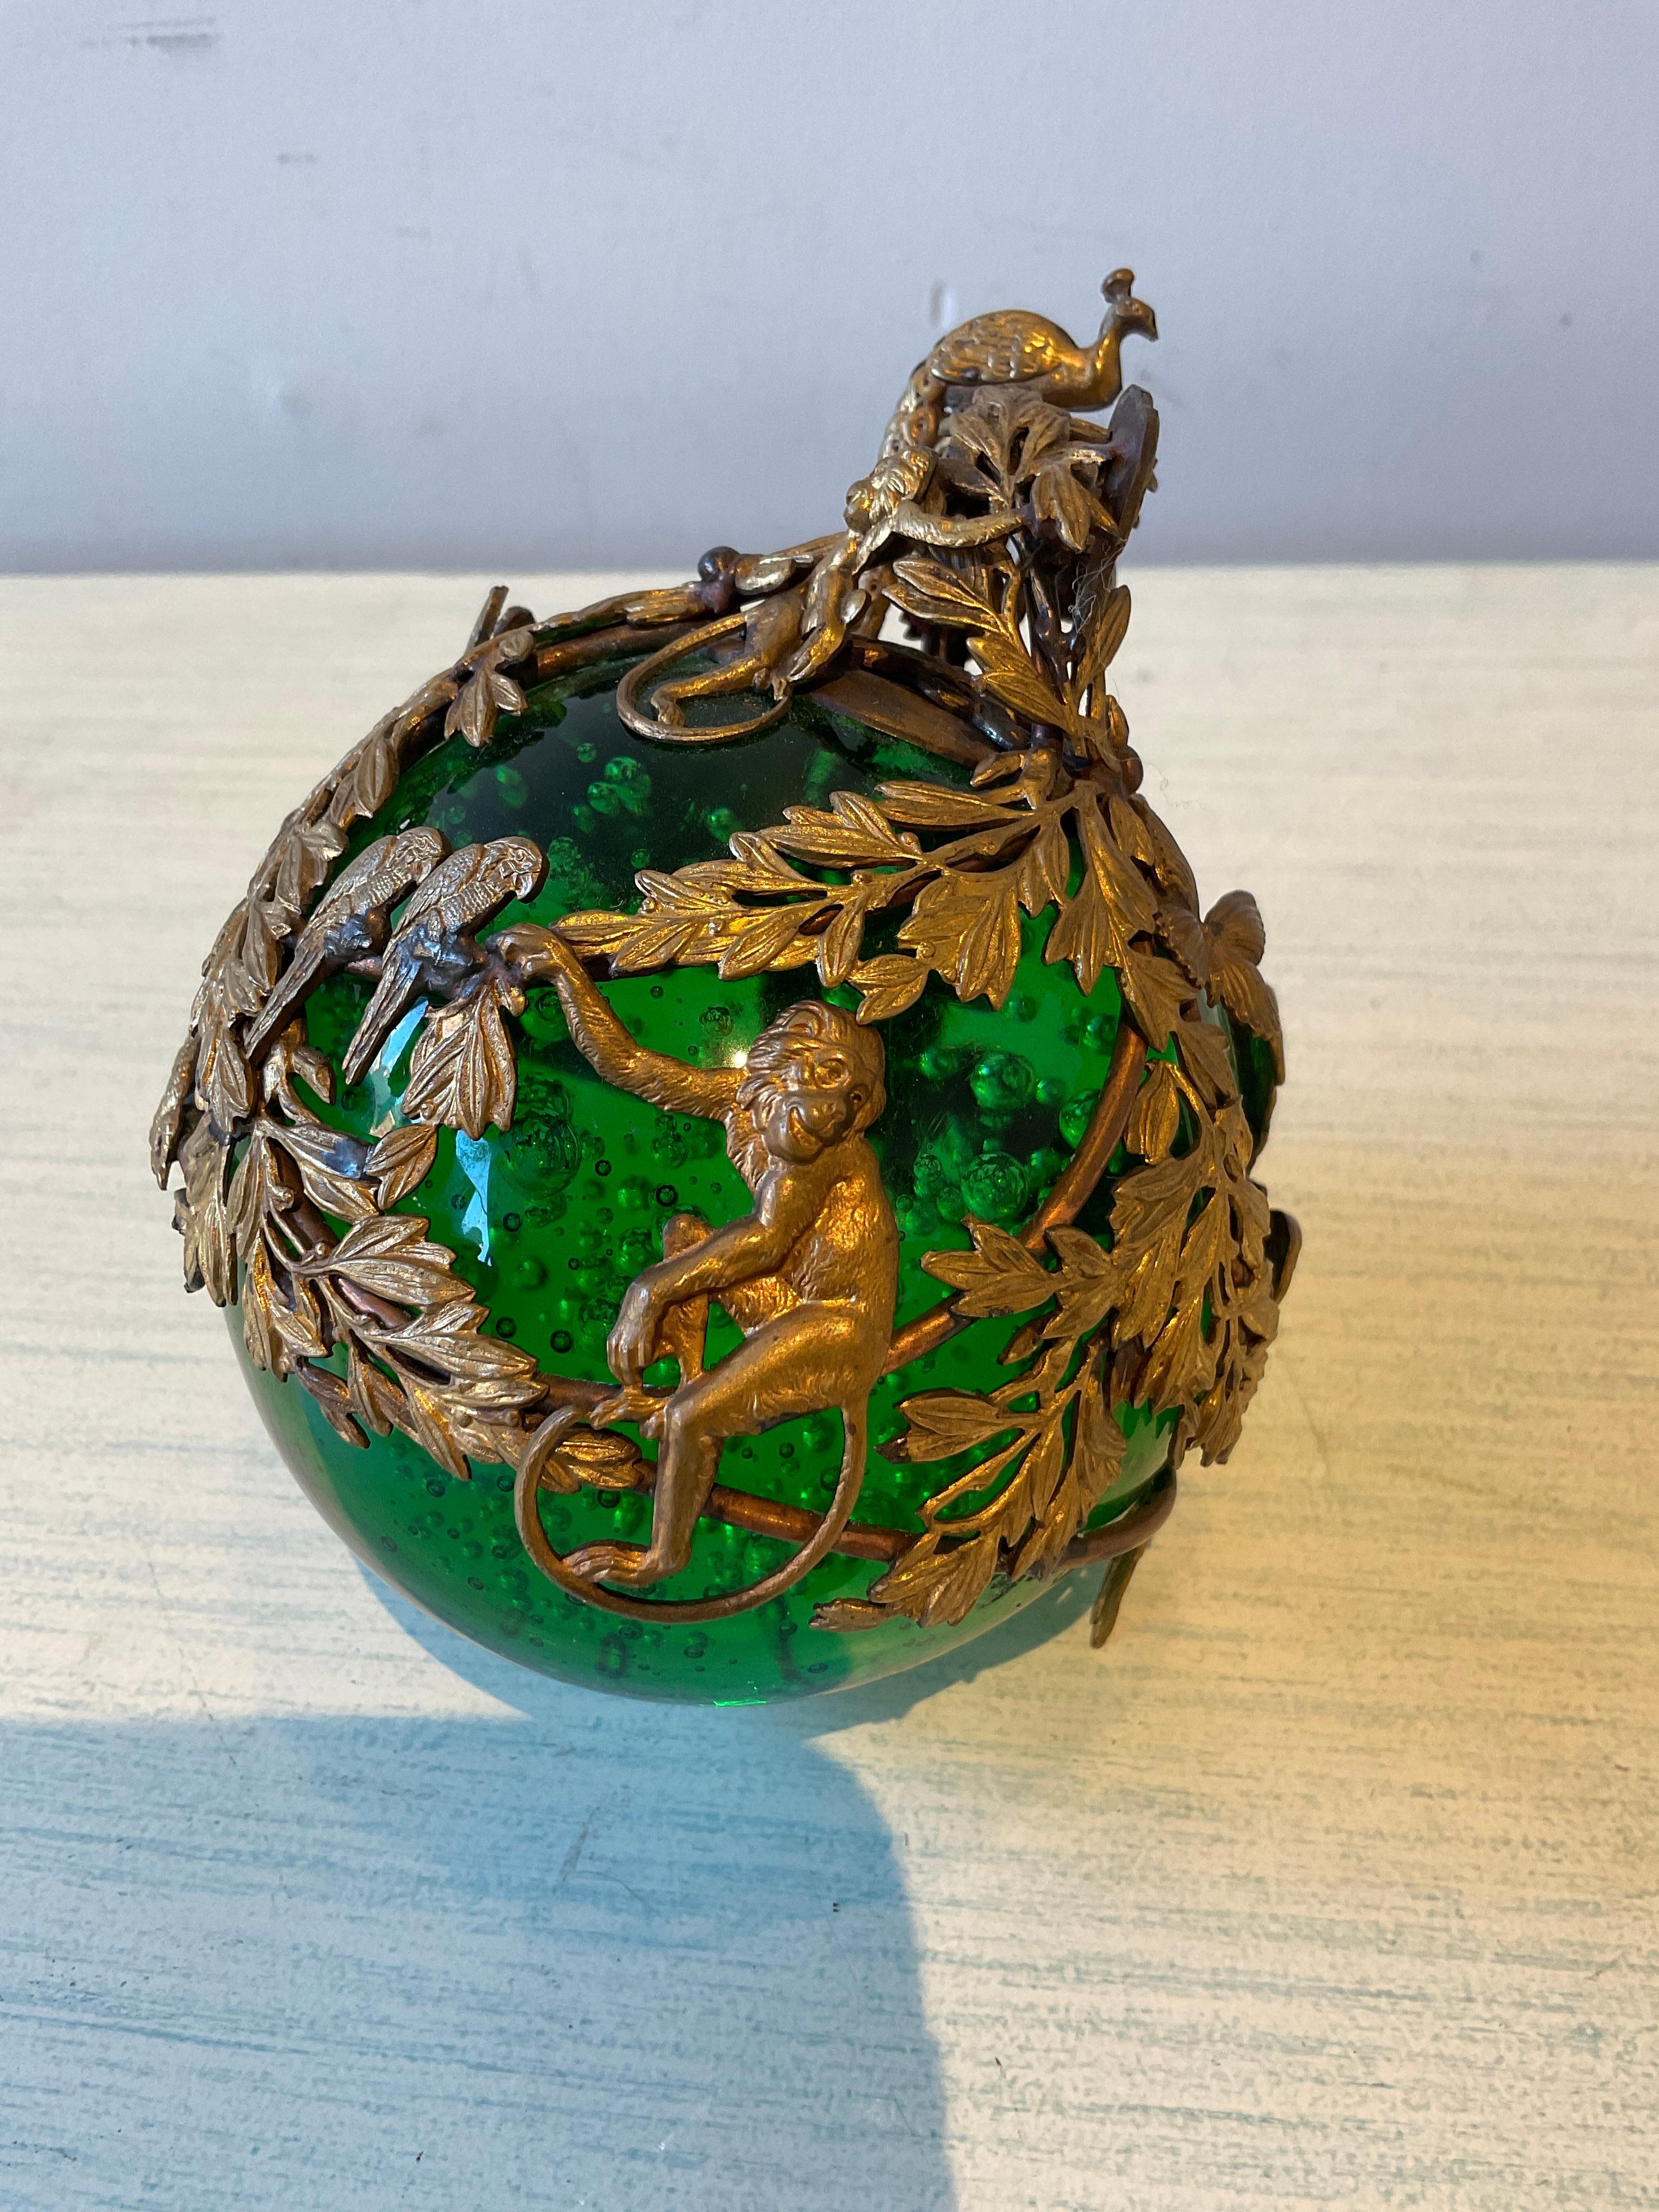 French 1910 green bubble glass ornament with brass ormolu of a Monkey, parrot, snake, peacock and a butterfly. Would look great on a base.
Signed, but can’t make out the signature as seen in the last picture.